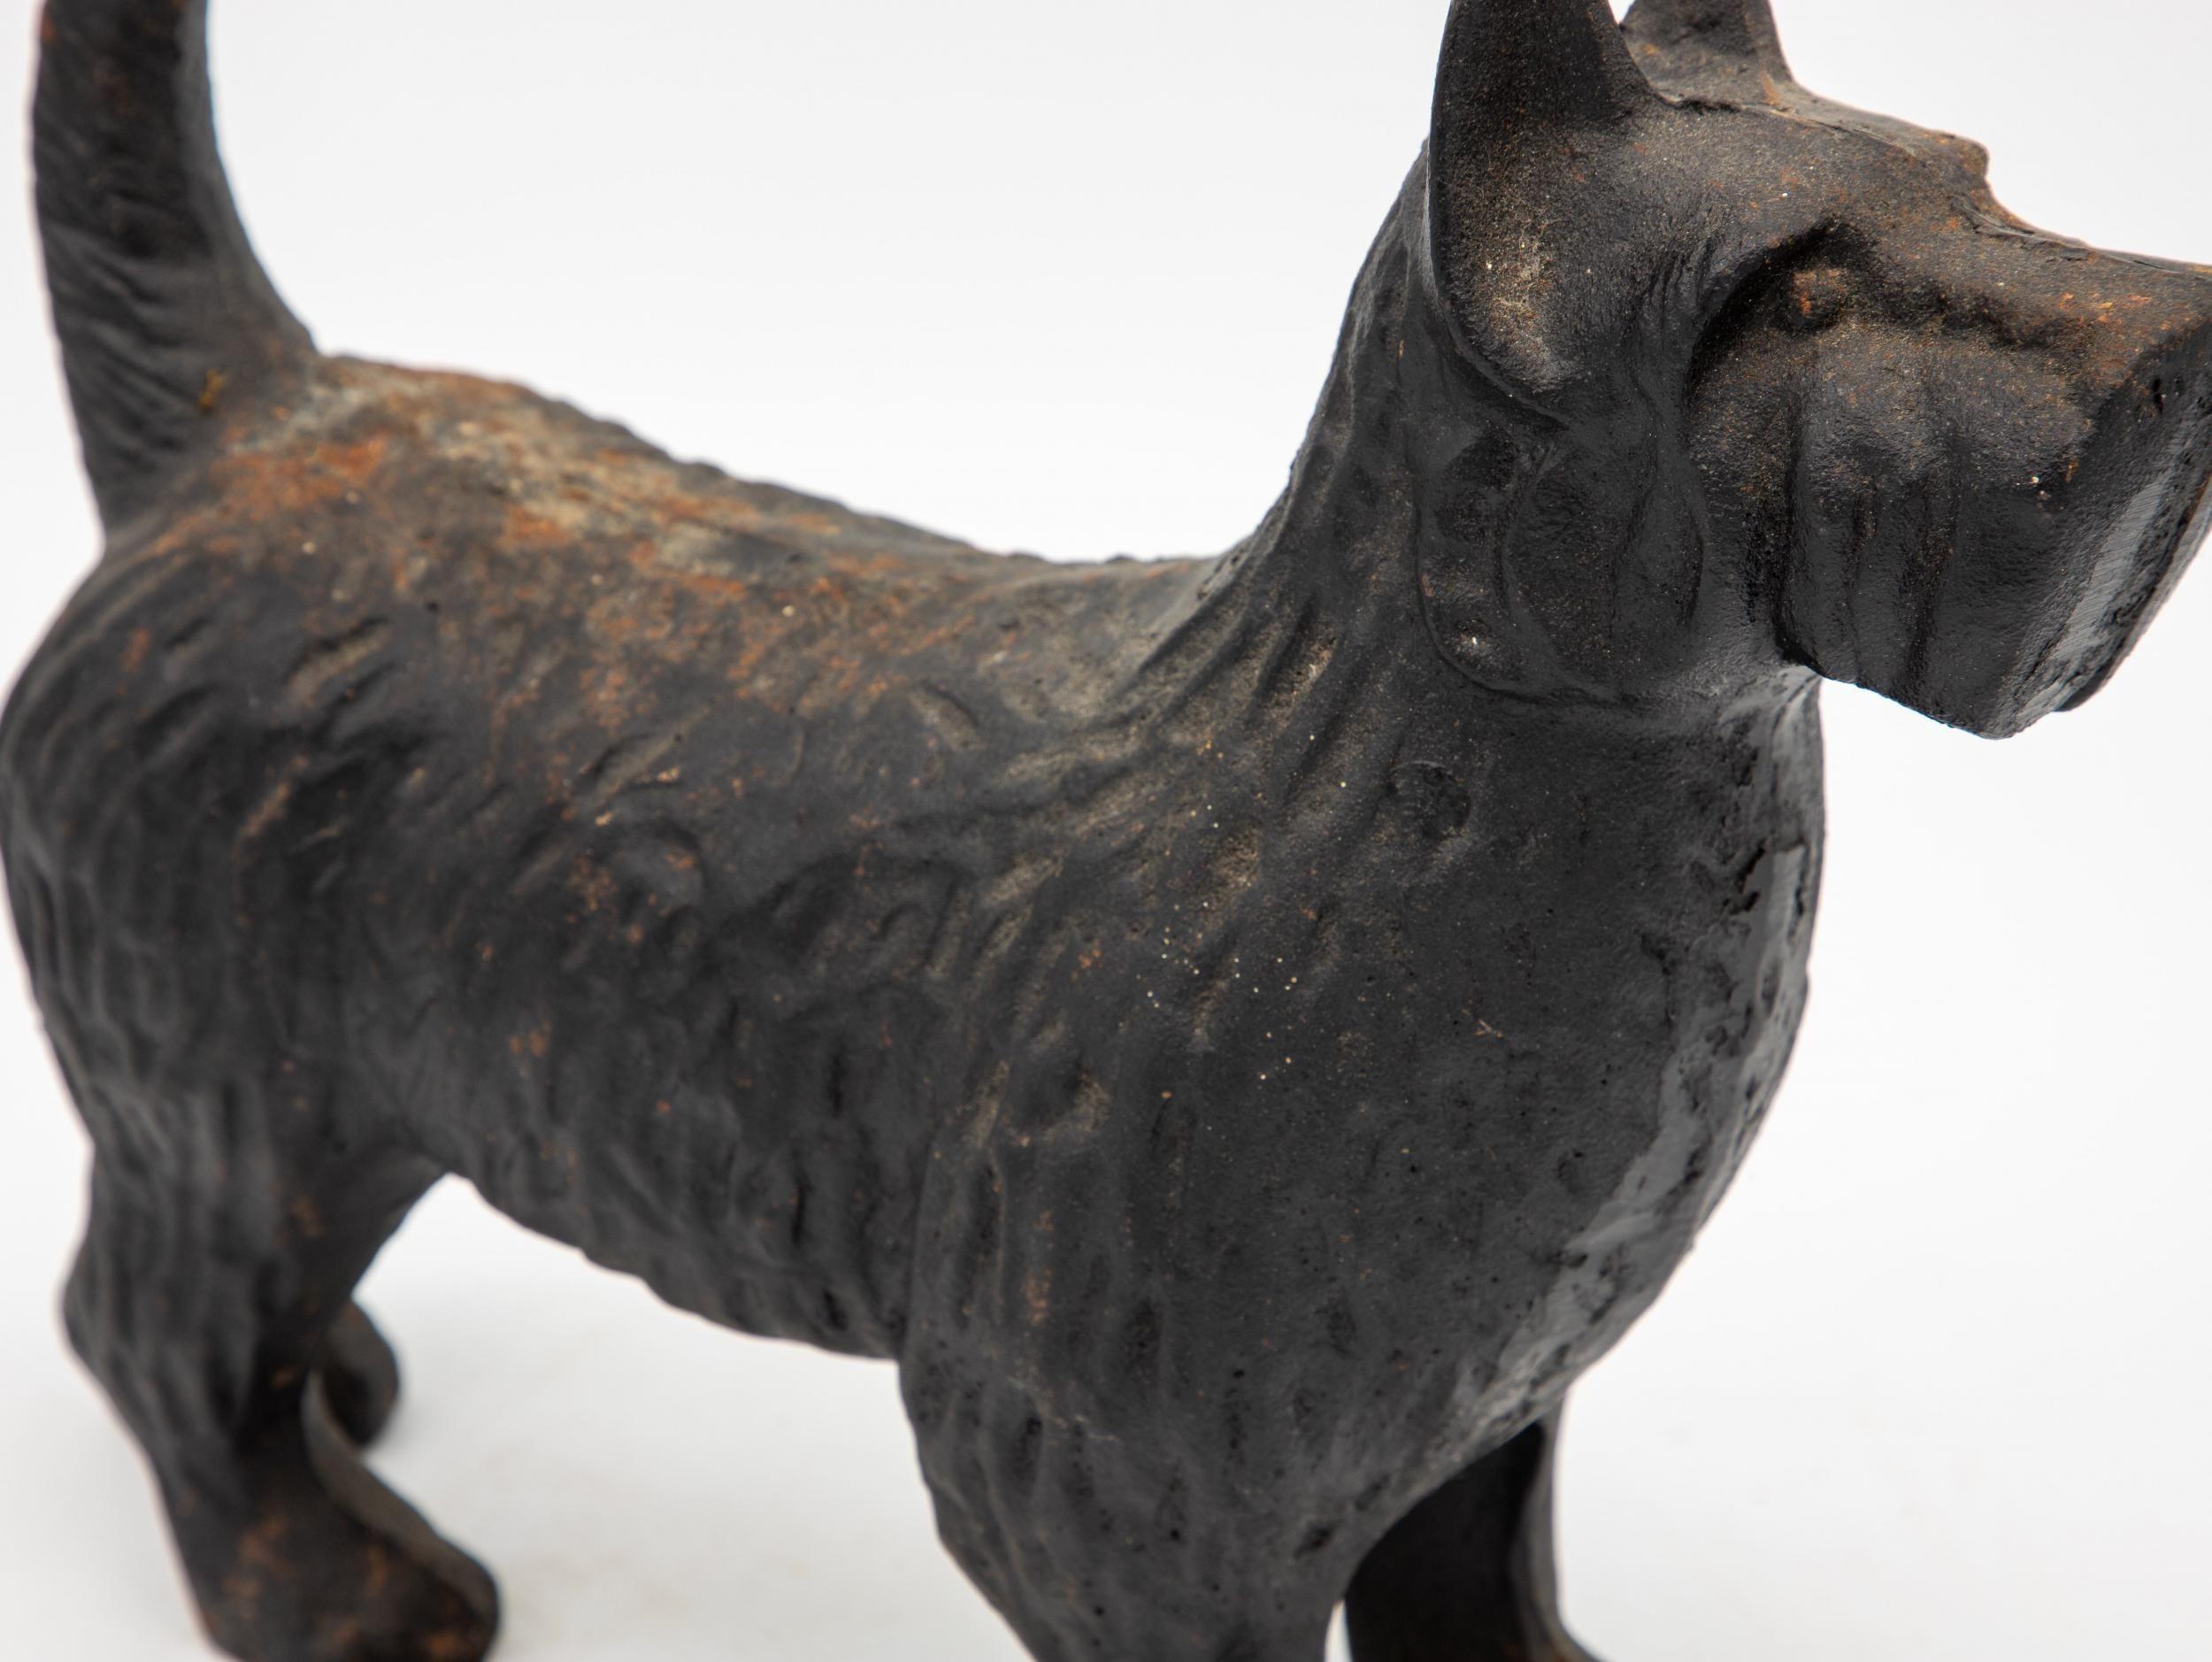 A cast iron door stop in the shape of a Scottie dog. A lovely example of cast iron English door stops, this dog features pointed ears, a detailed face, and a standing tail.